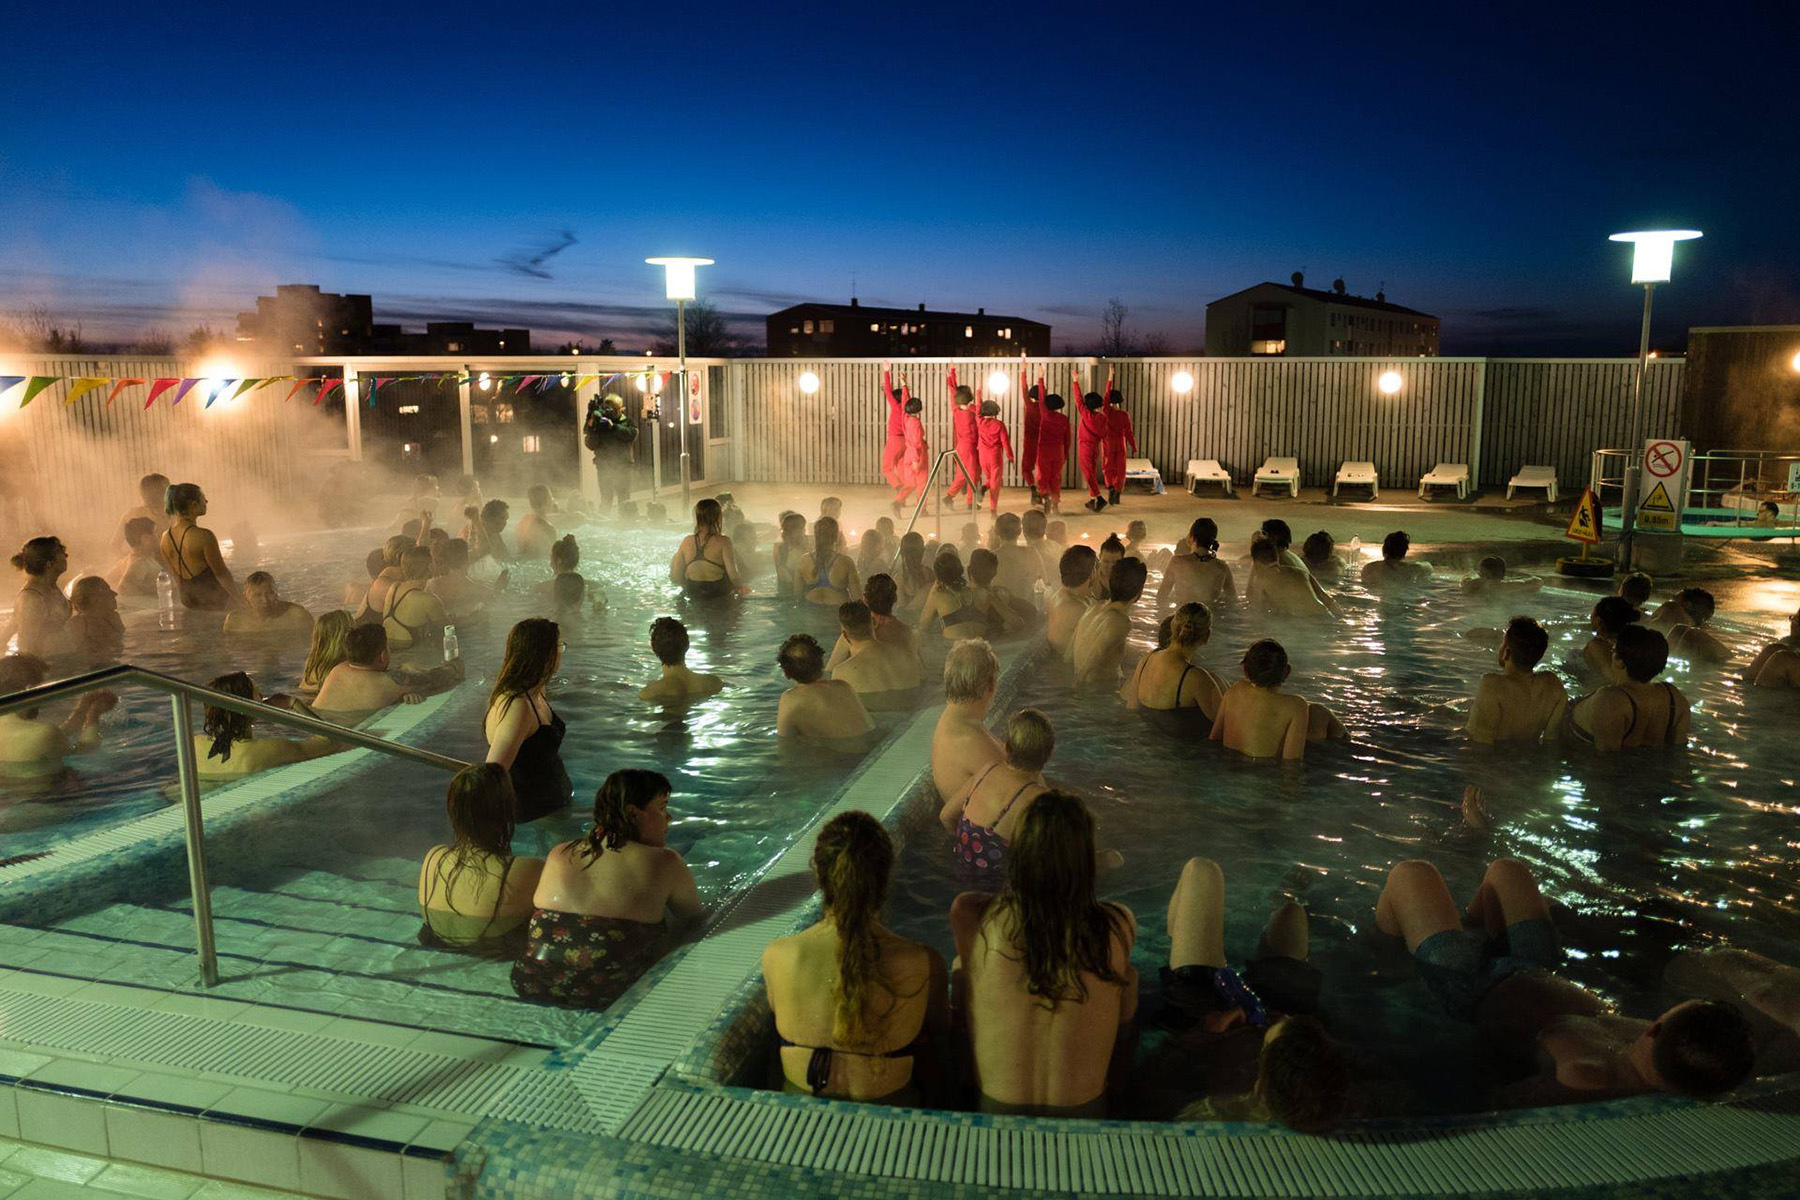 Photo of Reykjavik Dance Festival. Audience seated in hot pools in the dark, with steam rising. Dancers at front of pools in red suits.